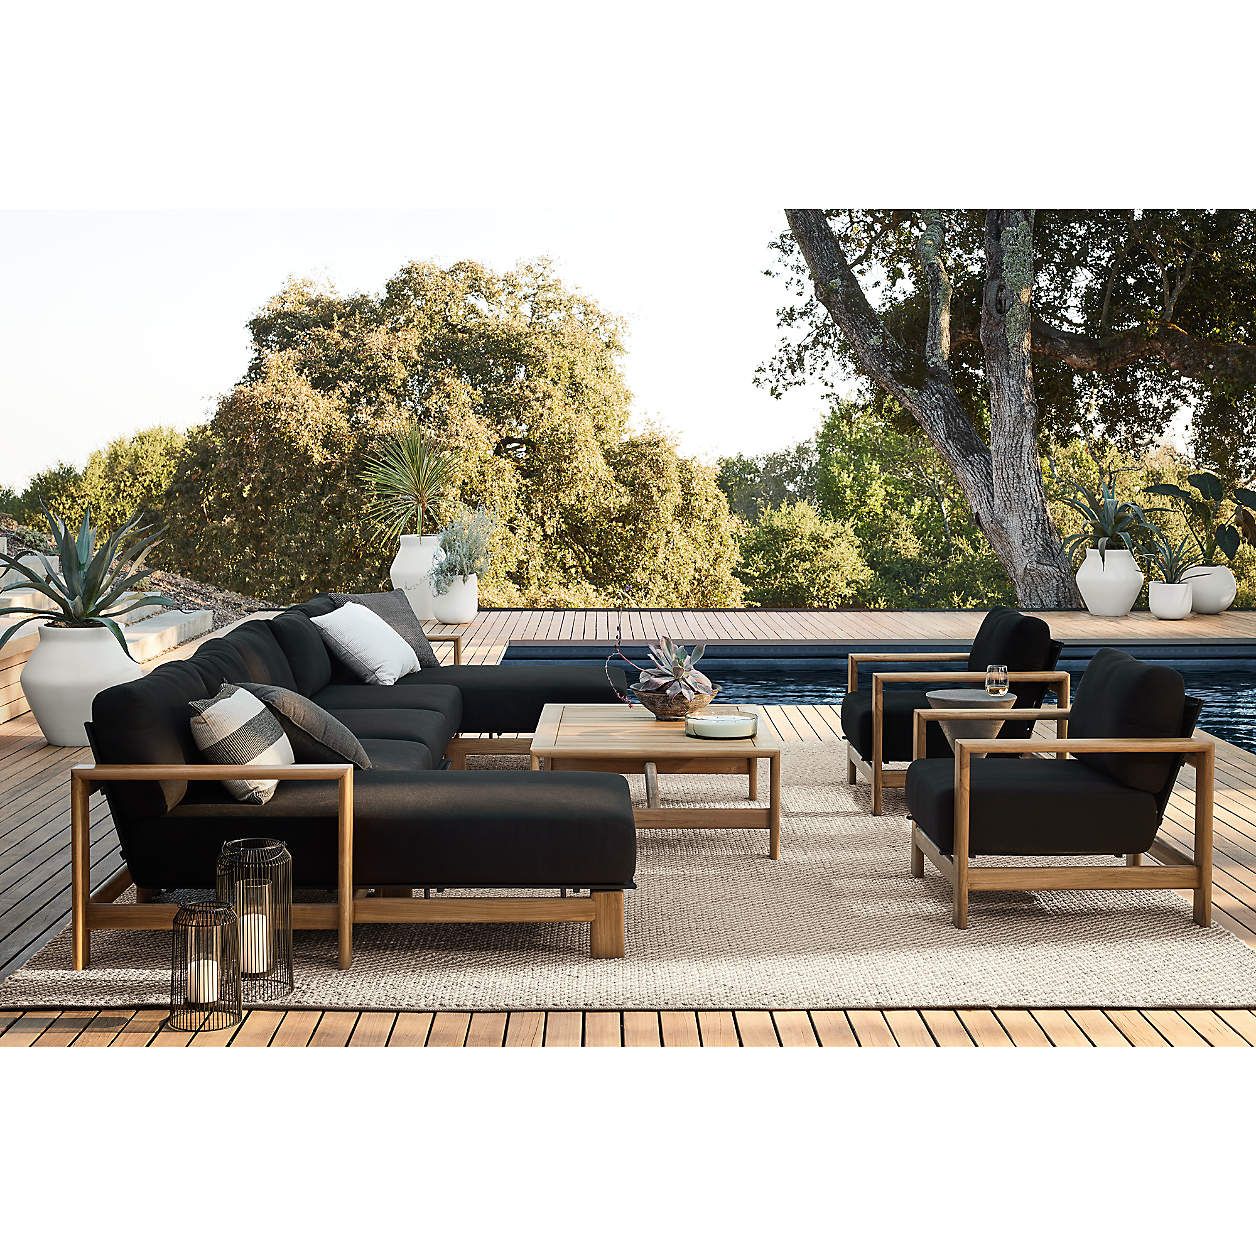 Anguilla Teak Outdoor Lounge Chair with Black Cushions | Crate & Barrel | Crate & Barrel